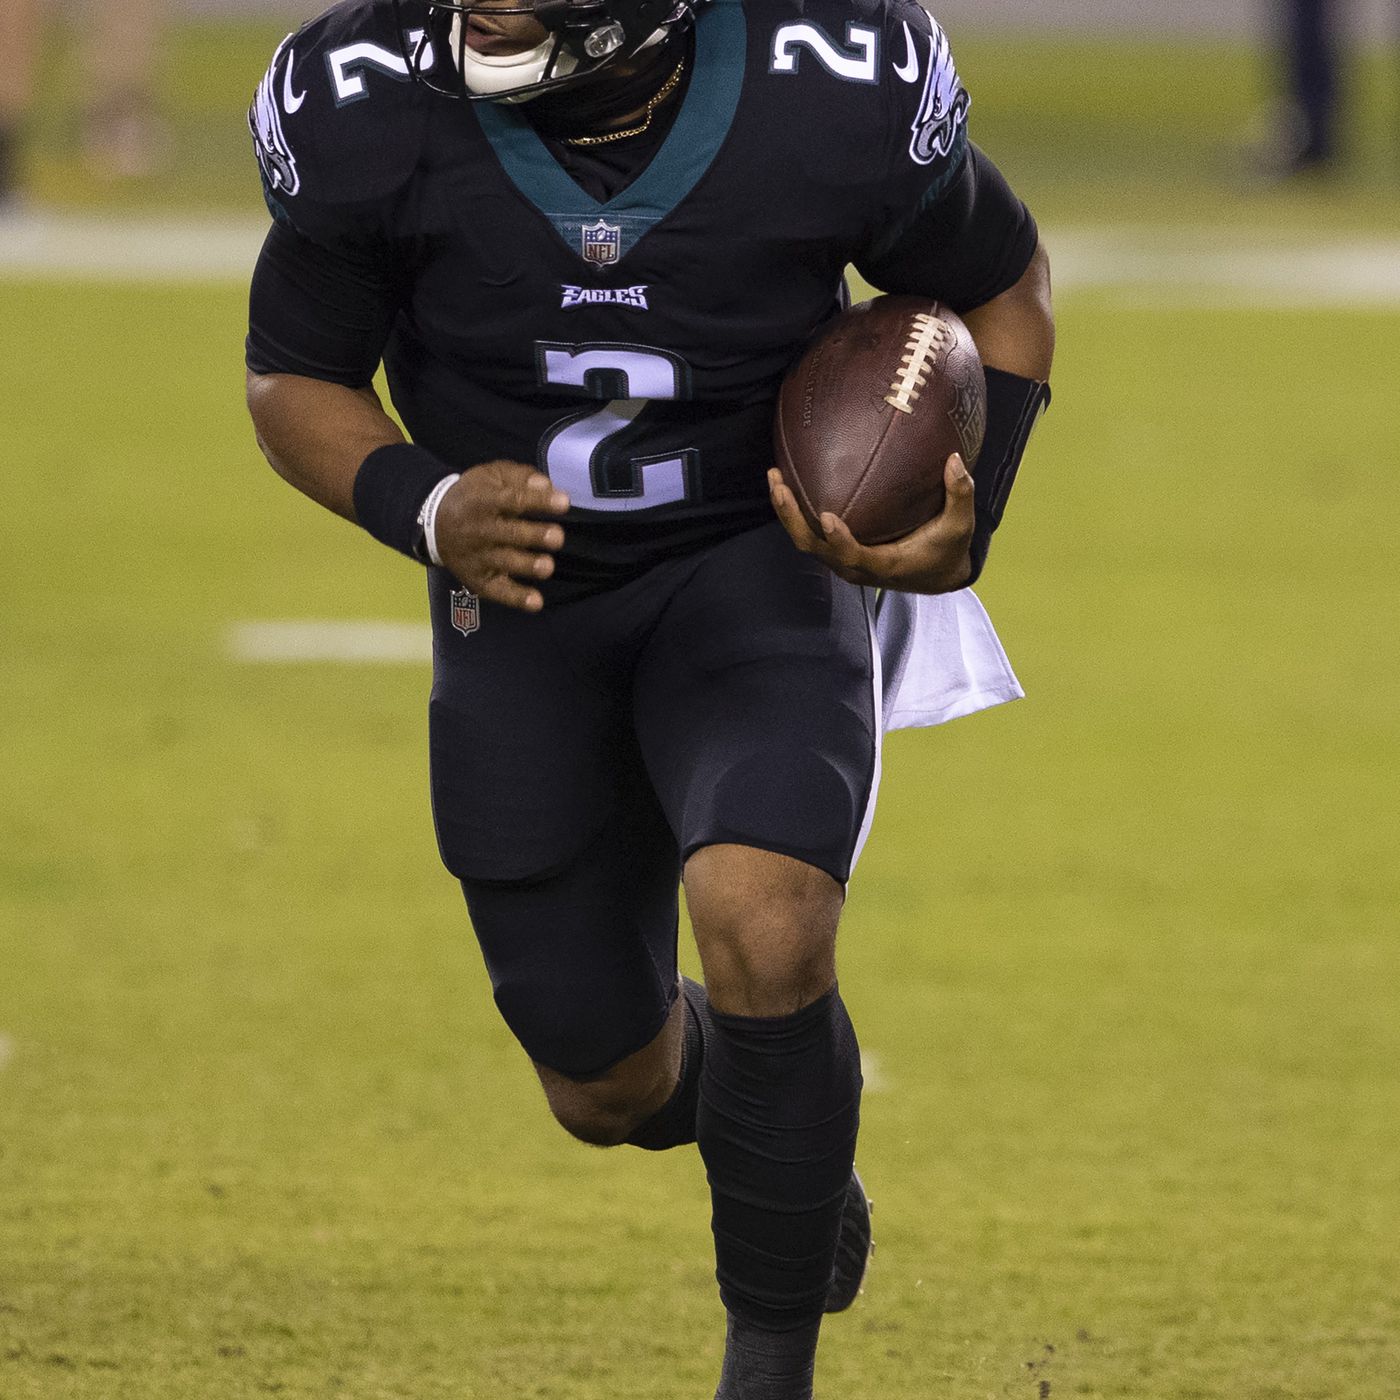 Eagles will be wearing black jerseys for Jalen Hurts' first NFL 